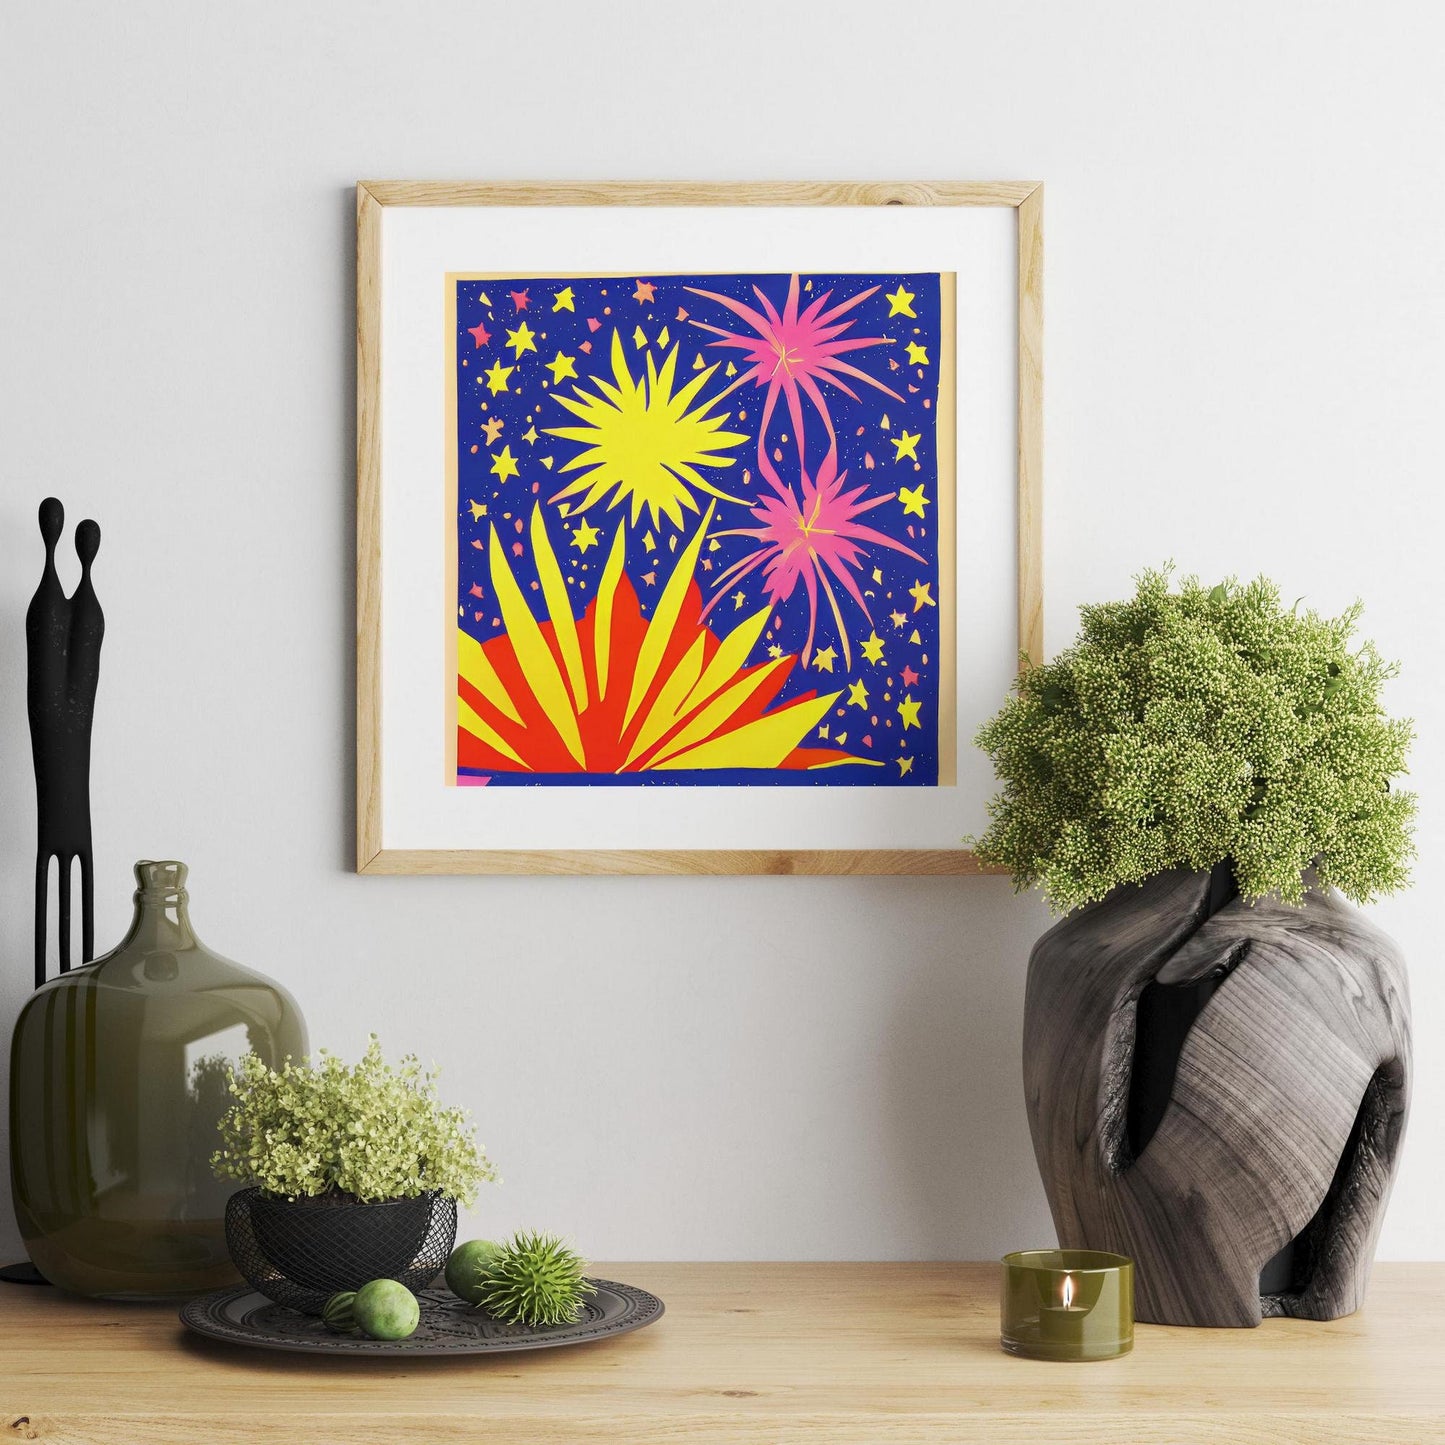 New Year'S Eve Fireworks In The Air Canvas Print, Prints, Abstract Print, Canvas Wall Art, Birthday Gift, Framed Canvas, Original Watercolor